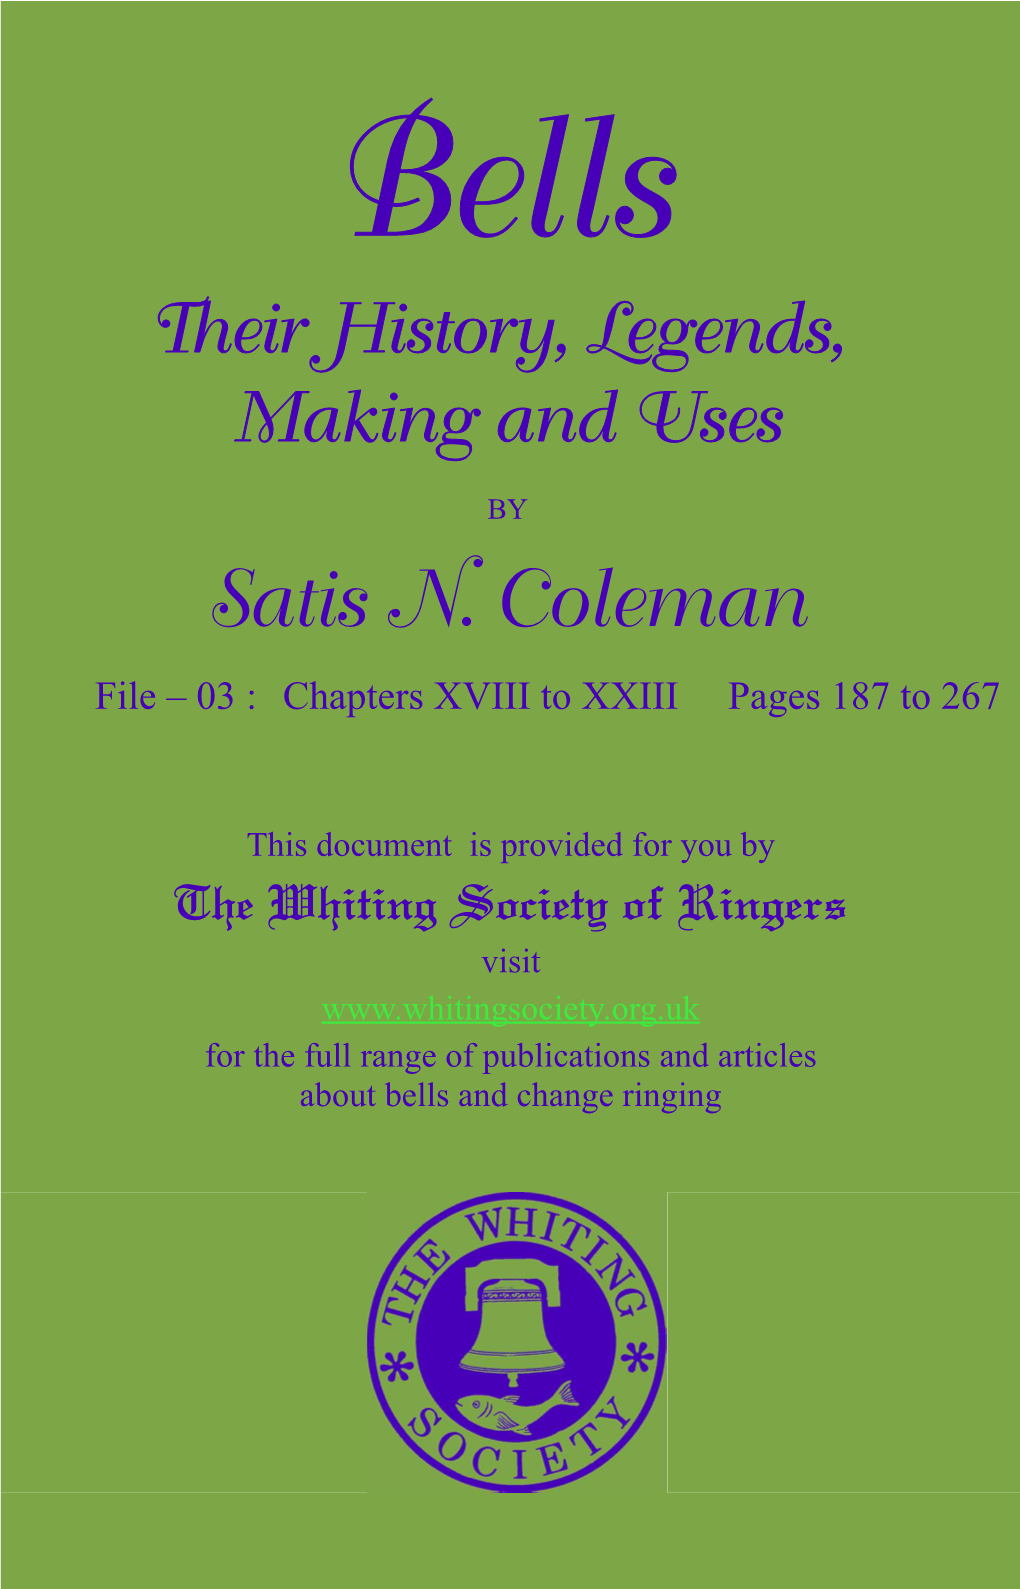 Satis N. Coleman File – 03 : Chapters XVIII to XXIII Pages 187 to 267